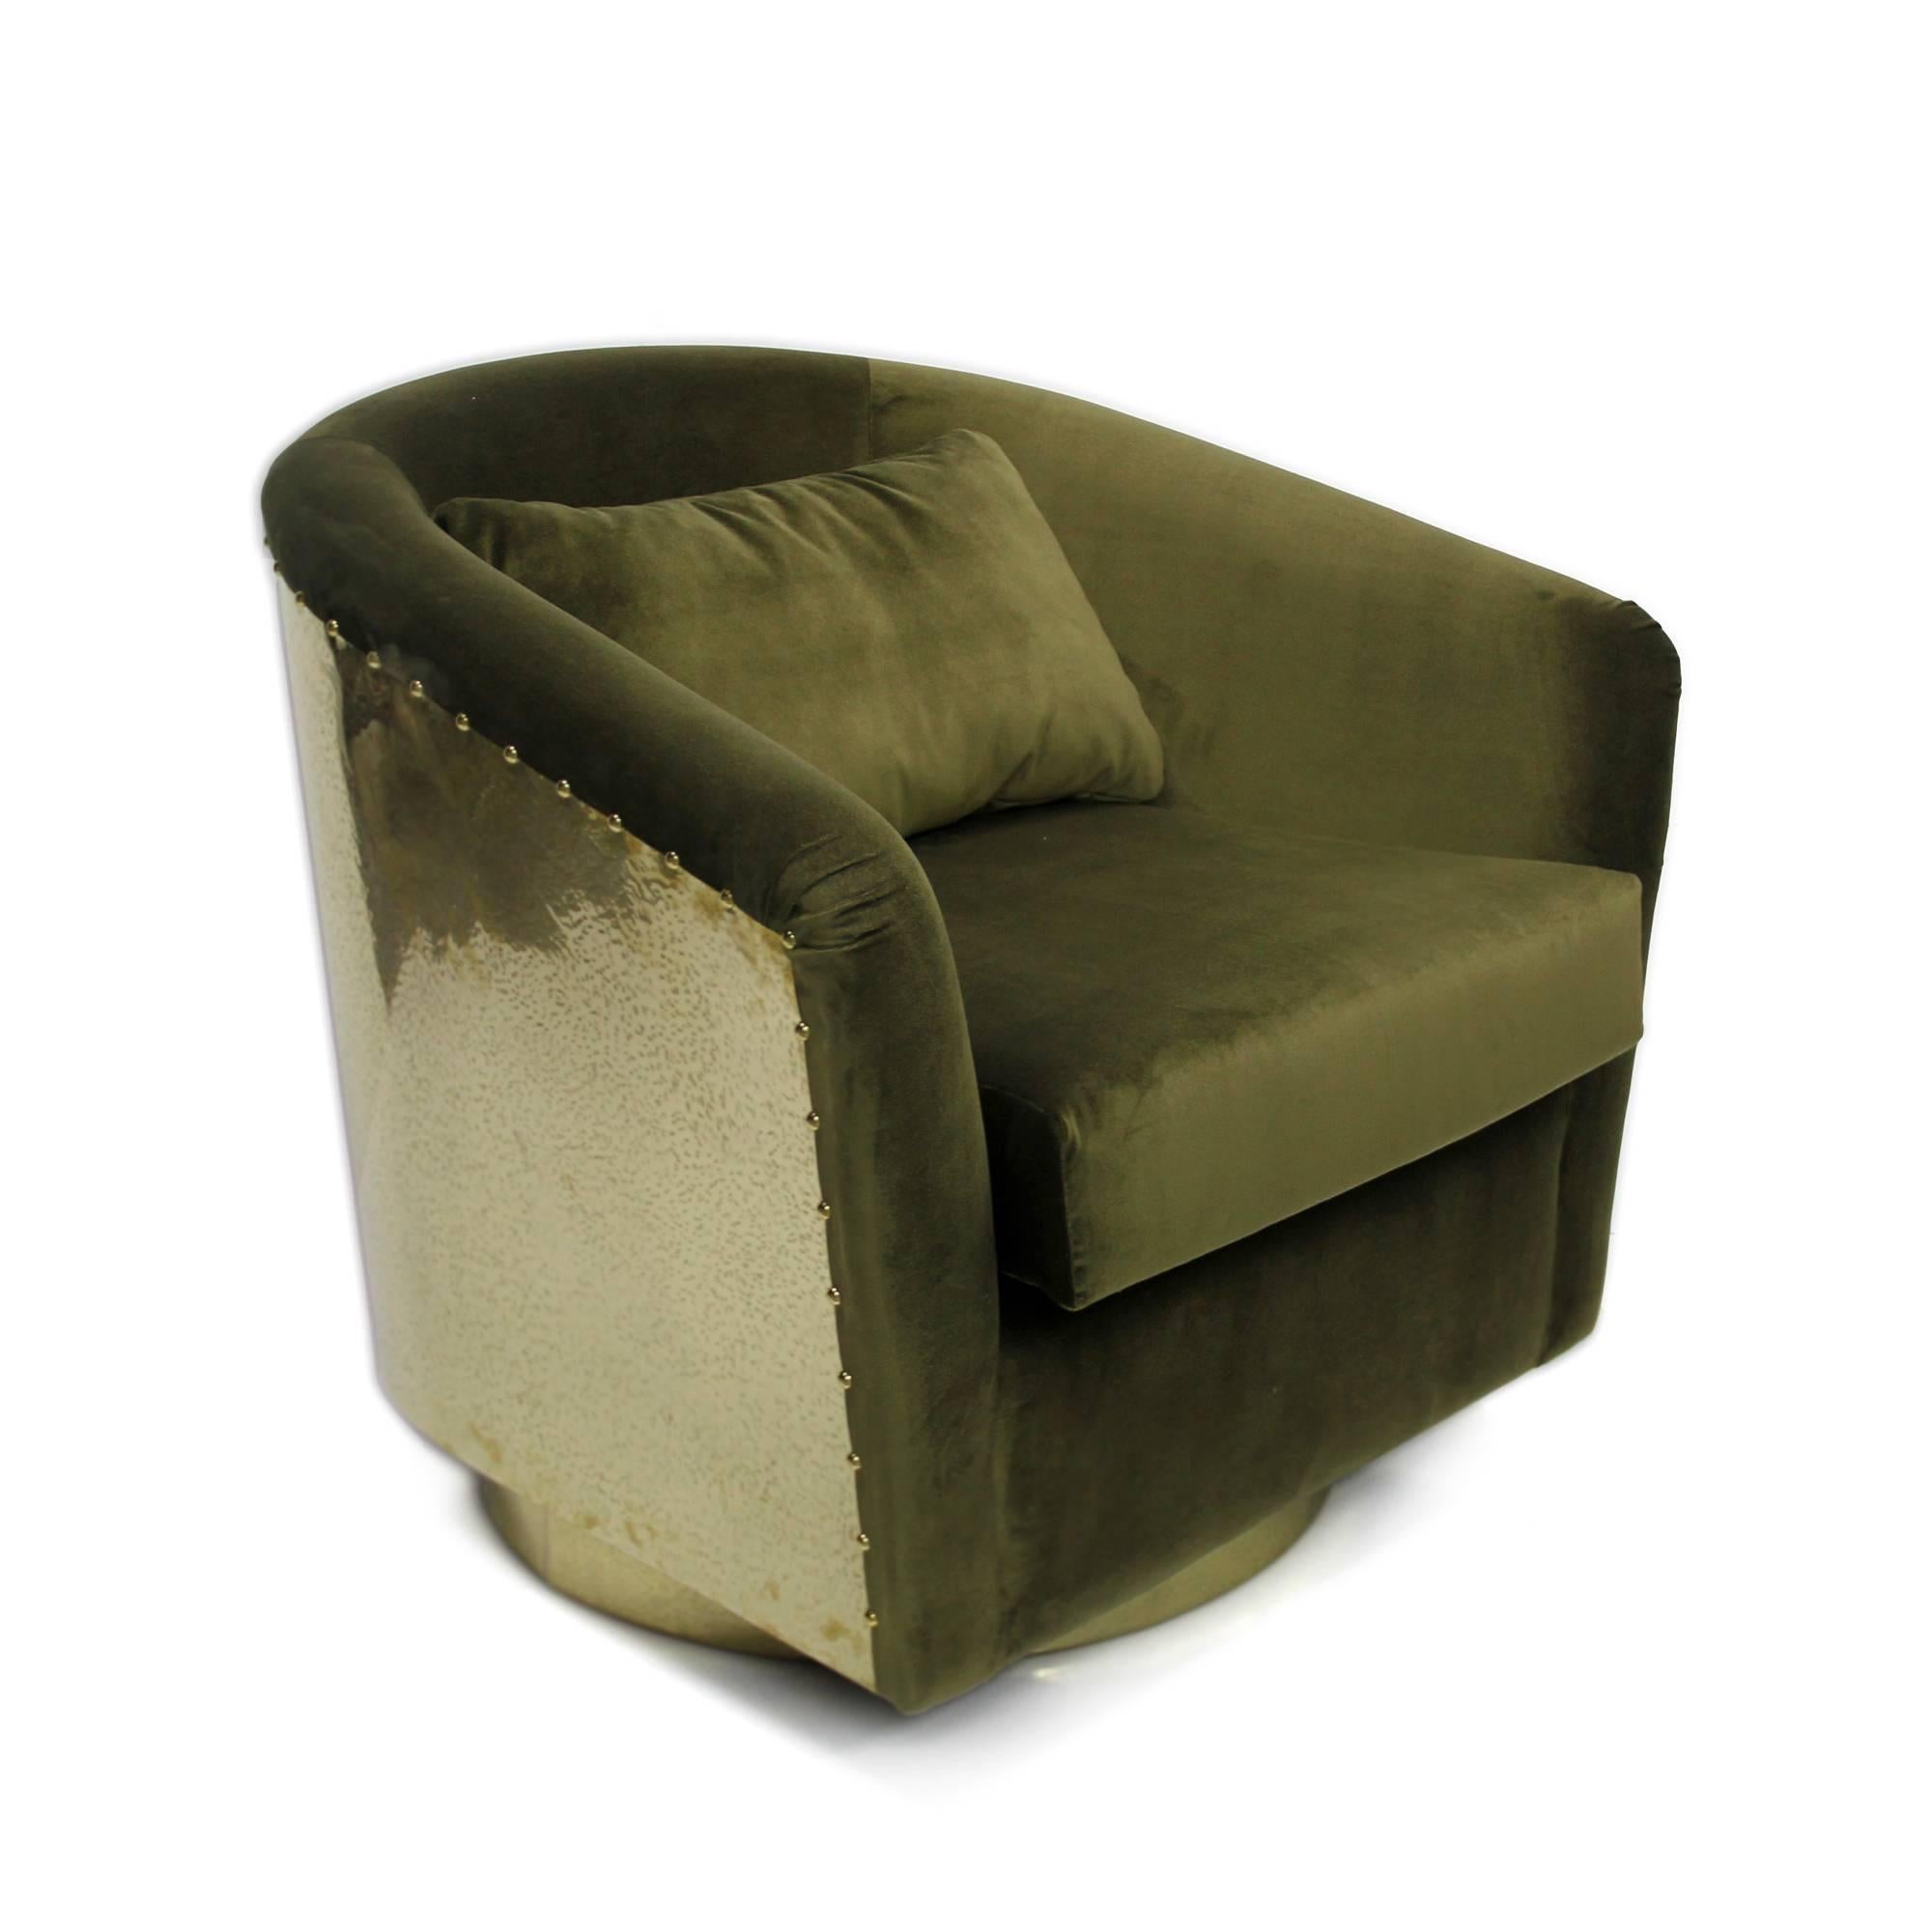 Armchair natural green in green velvet in rotative base.
Base and back are in high gloss hammered brass. Nails
are golden polished. 